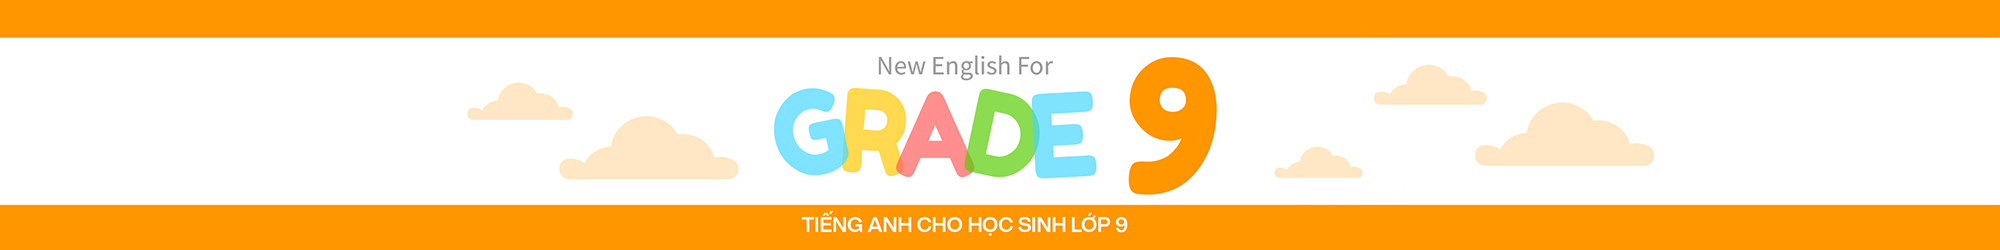 NEW ENGLISH FOR GRADE 9